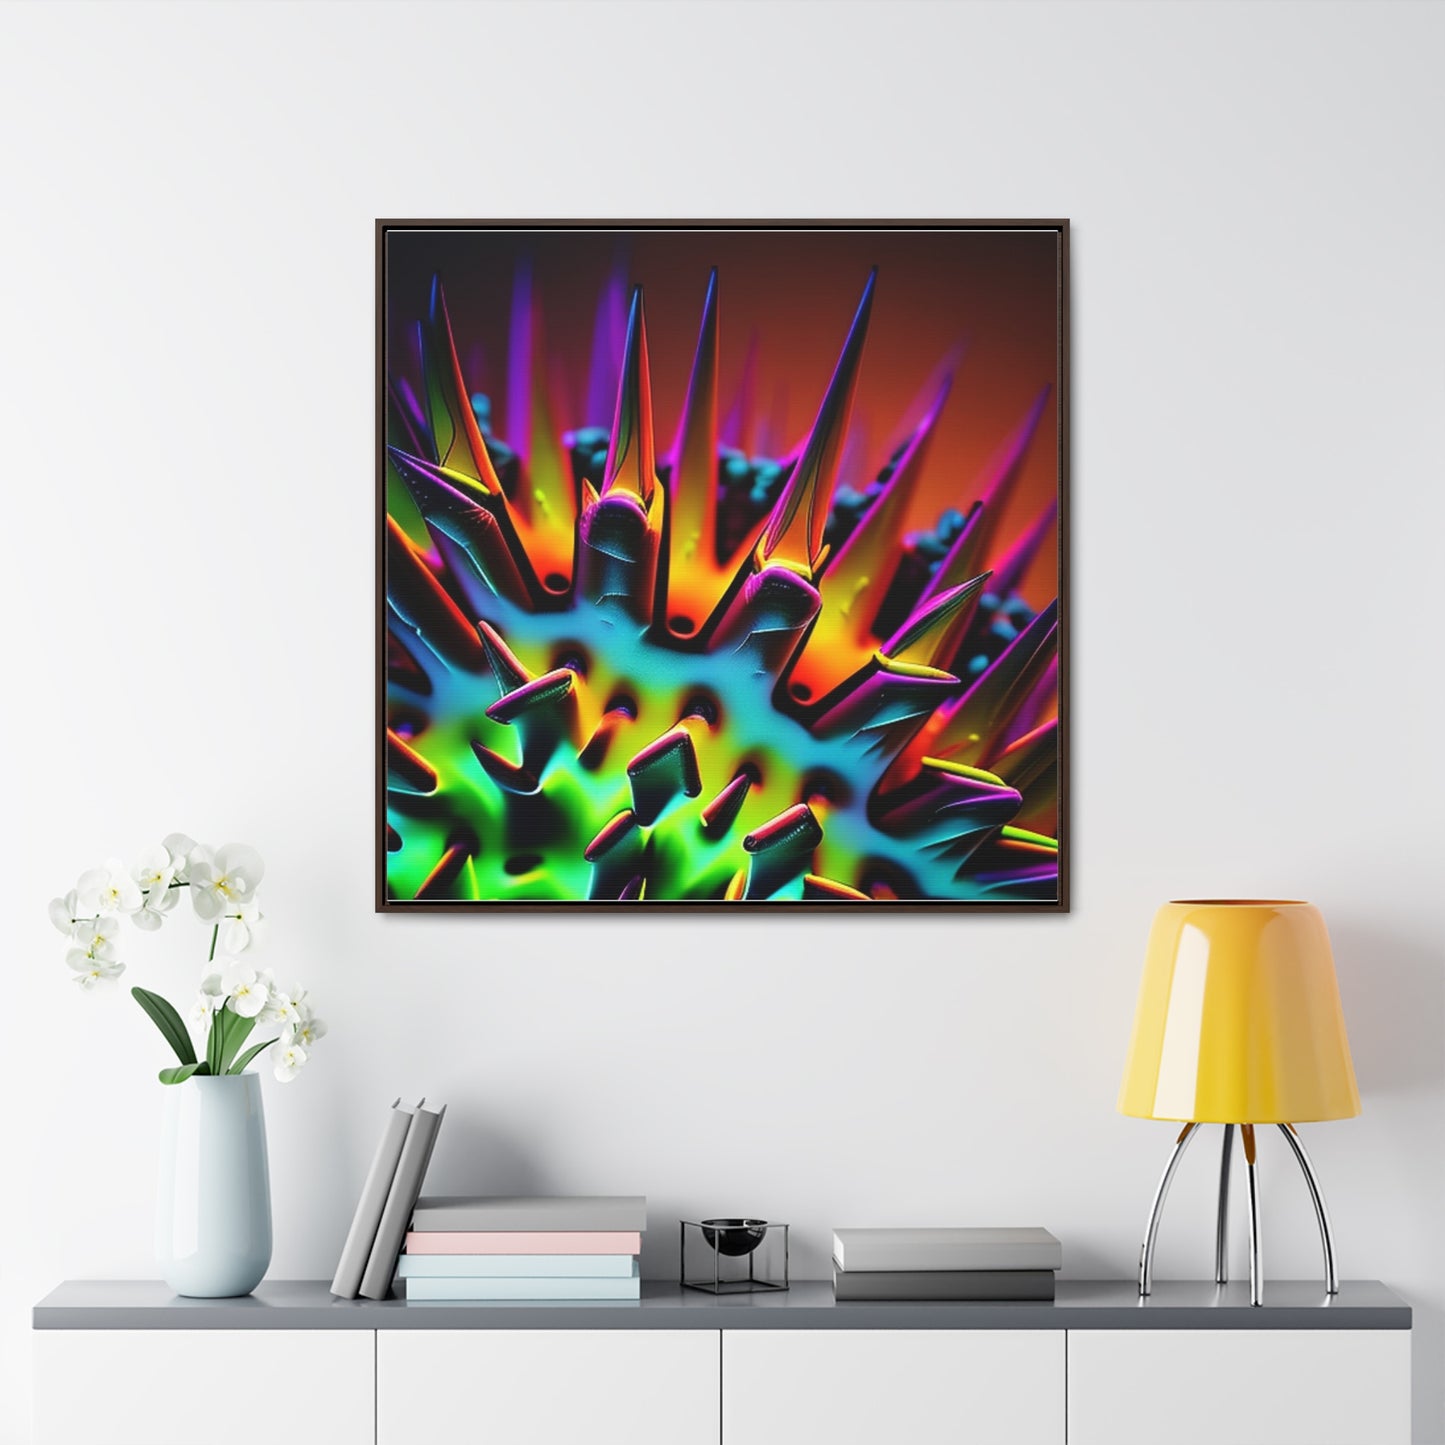 Gallery Canvas Wraps, Square Frame  Macro Neon Spike 4